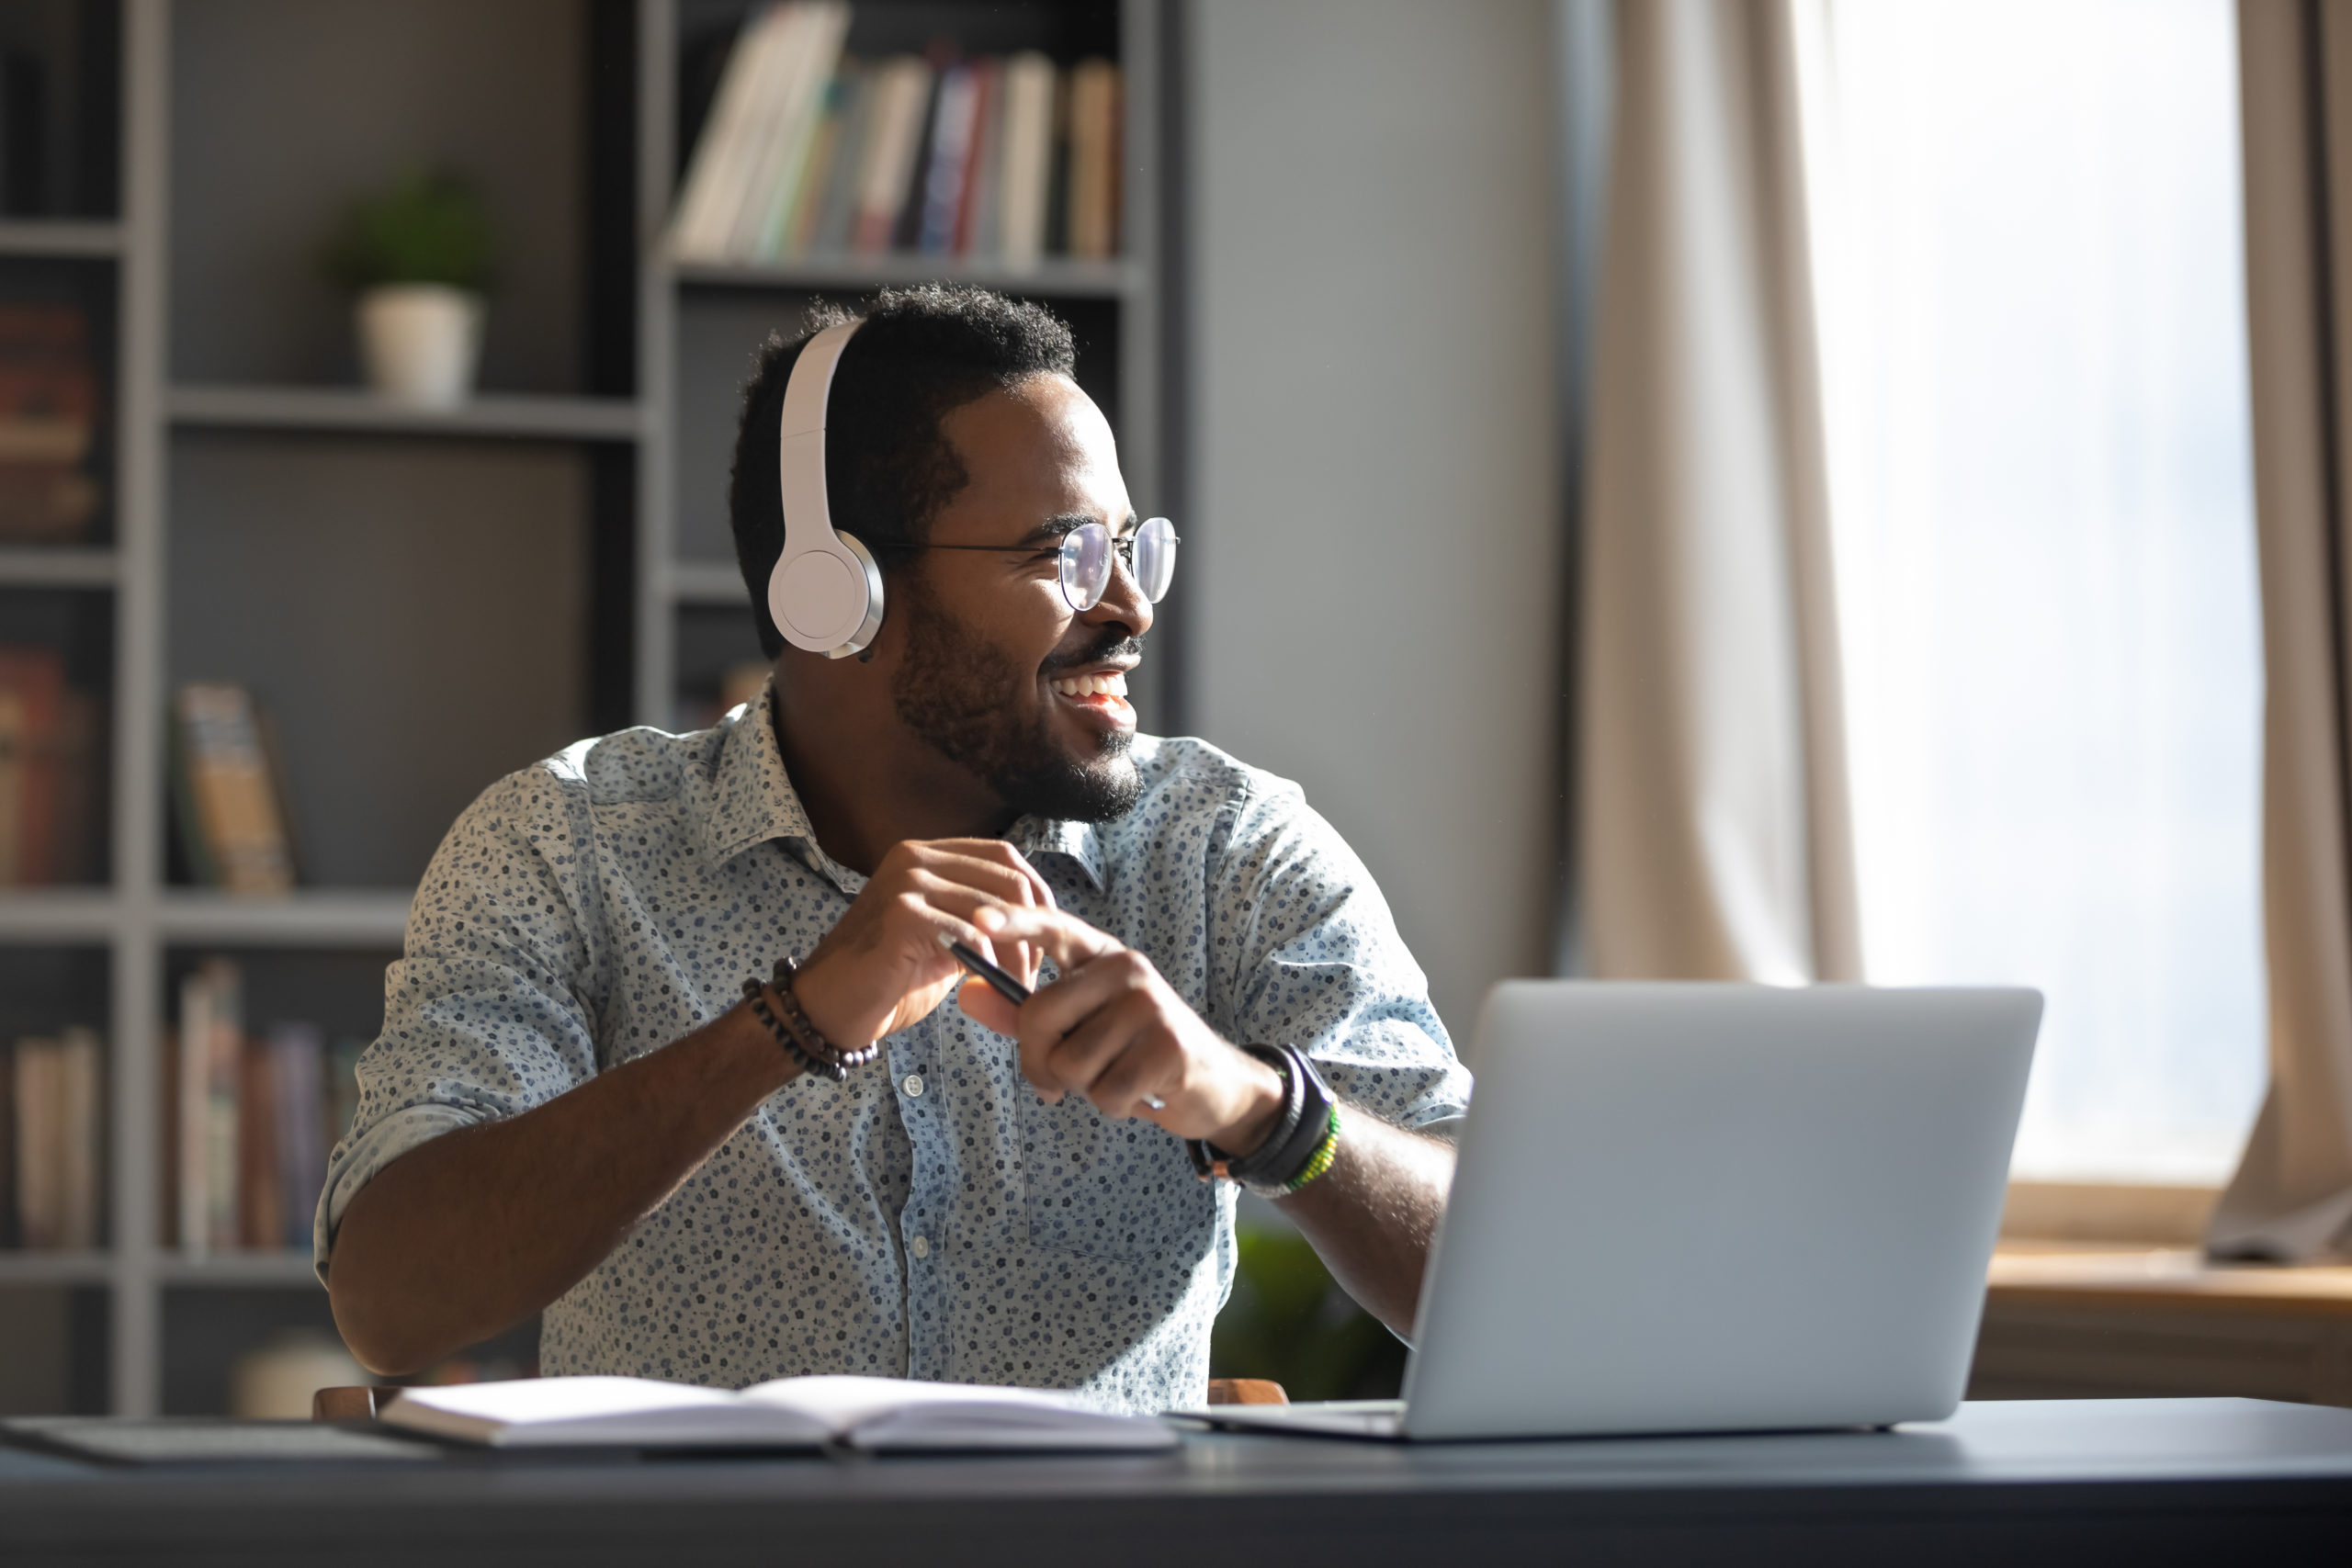 Why intranets are great at connecting remote workers